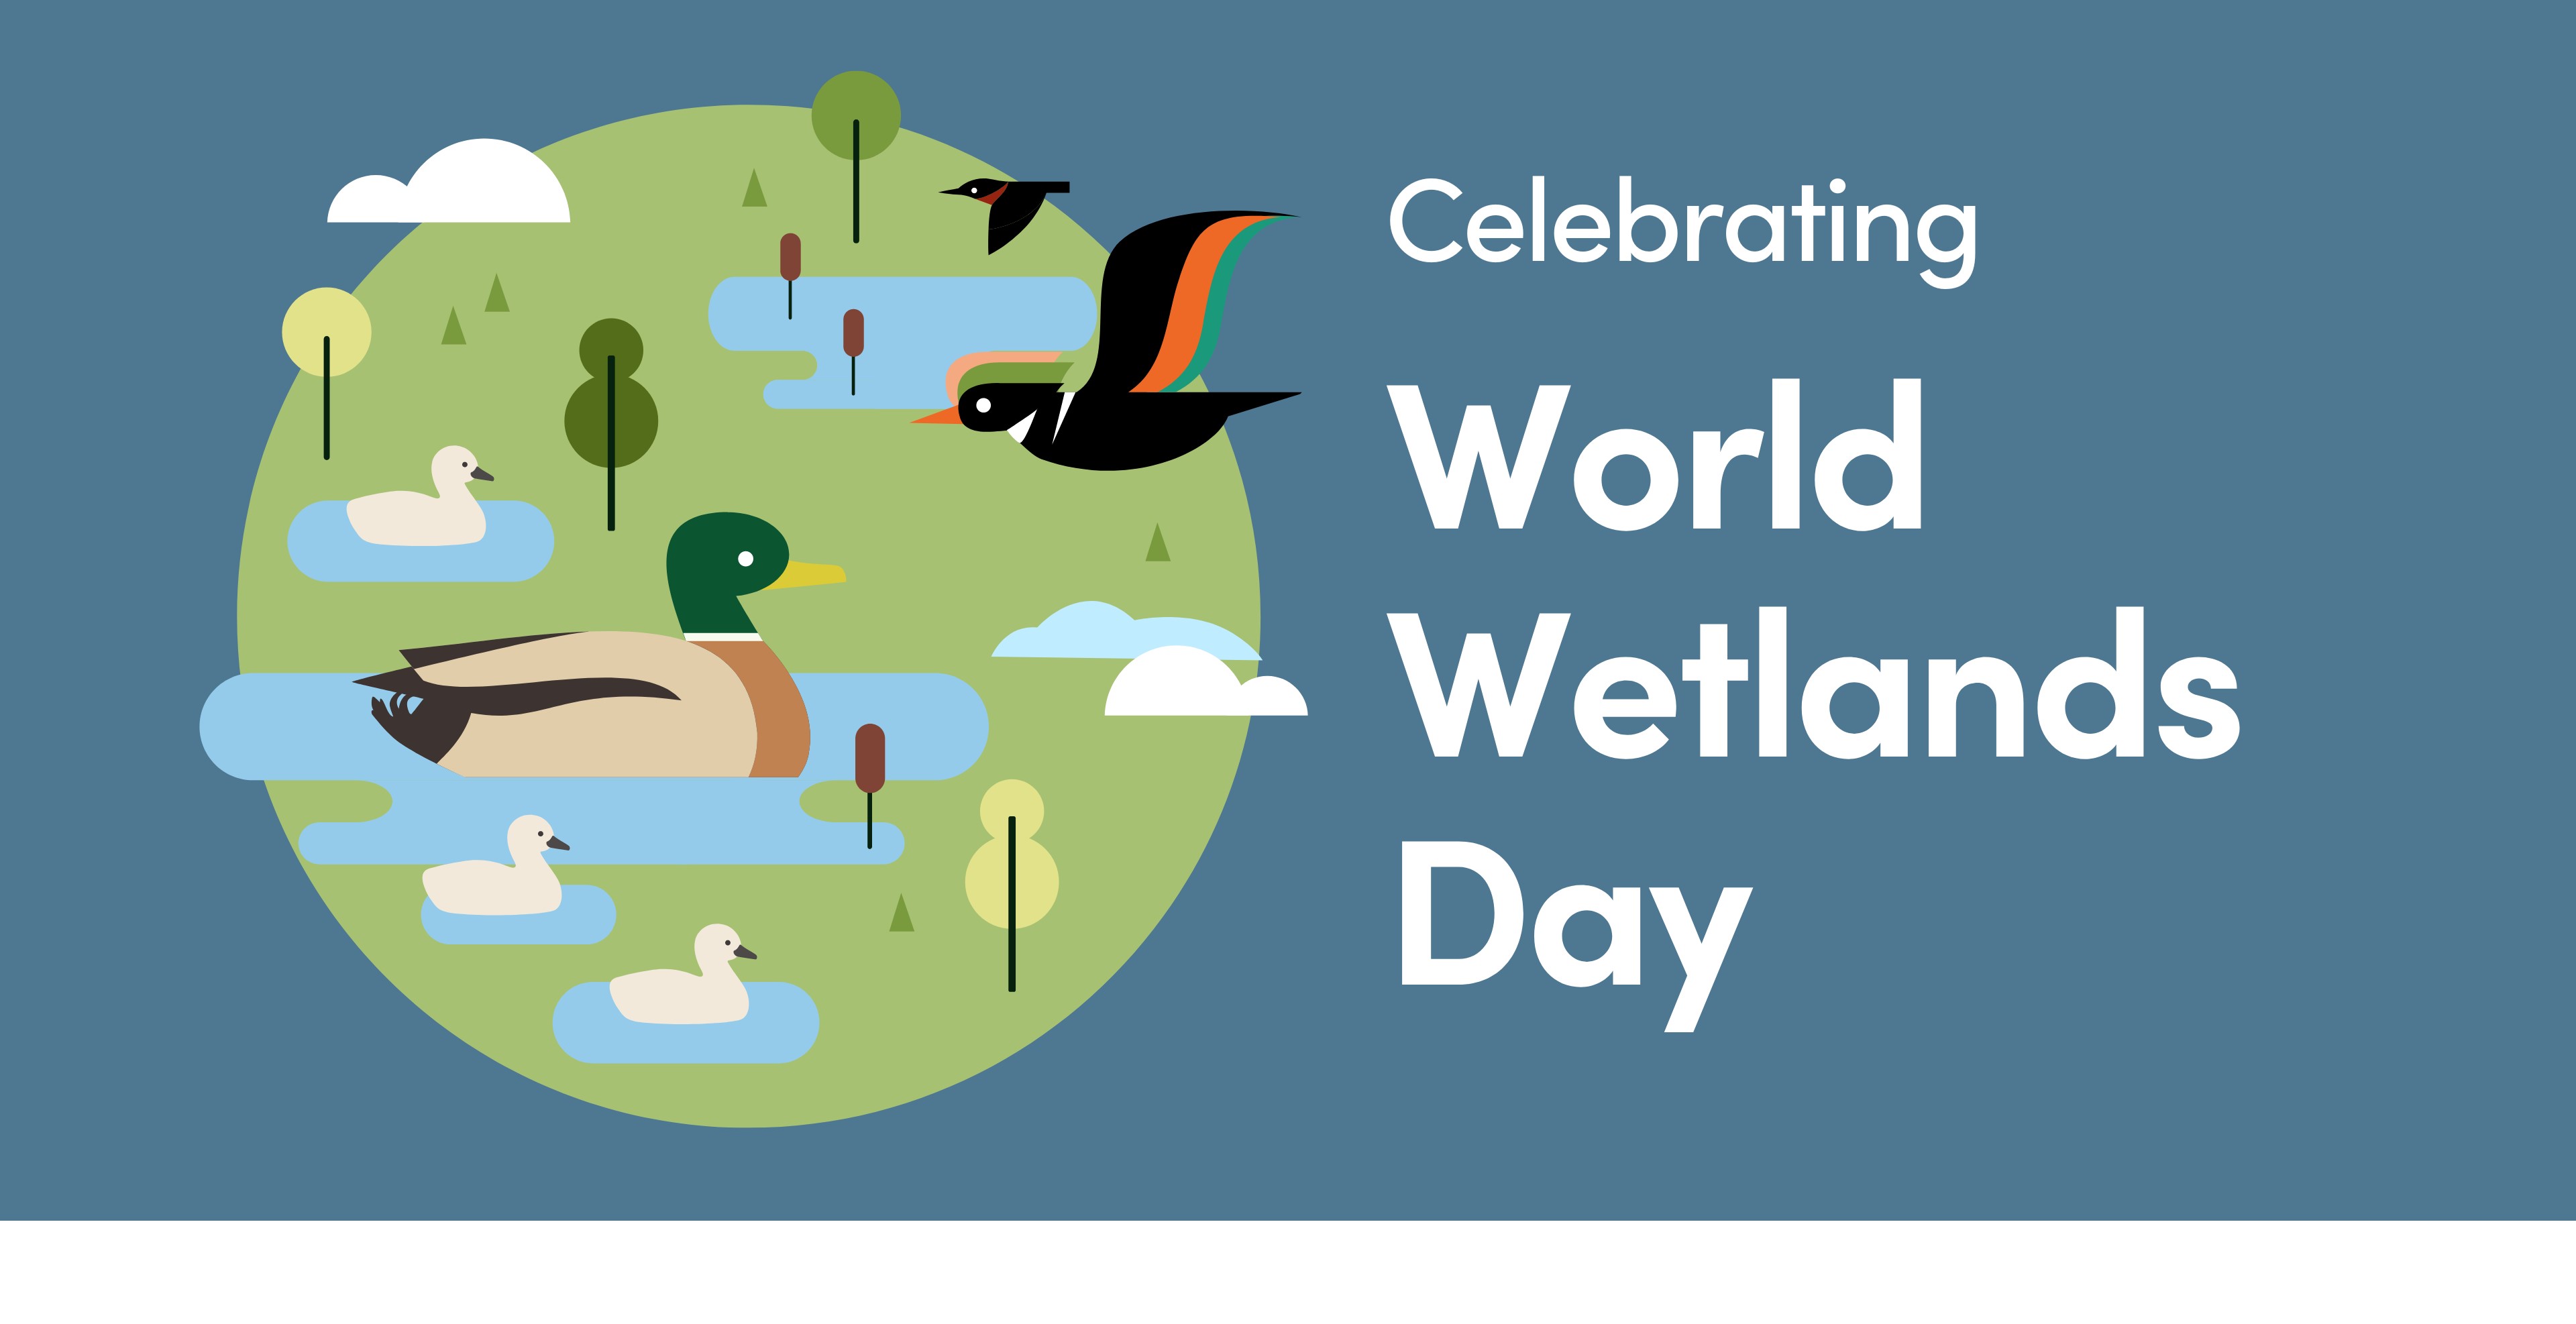 Illustration of ducks and other aquatic life in a wetland environment with text that reads "Celebrating World Wetlands Day"